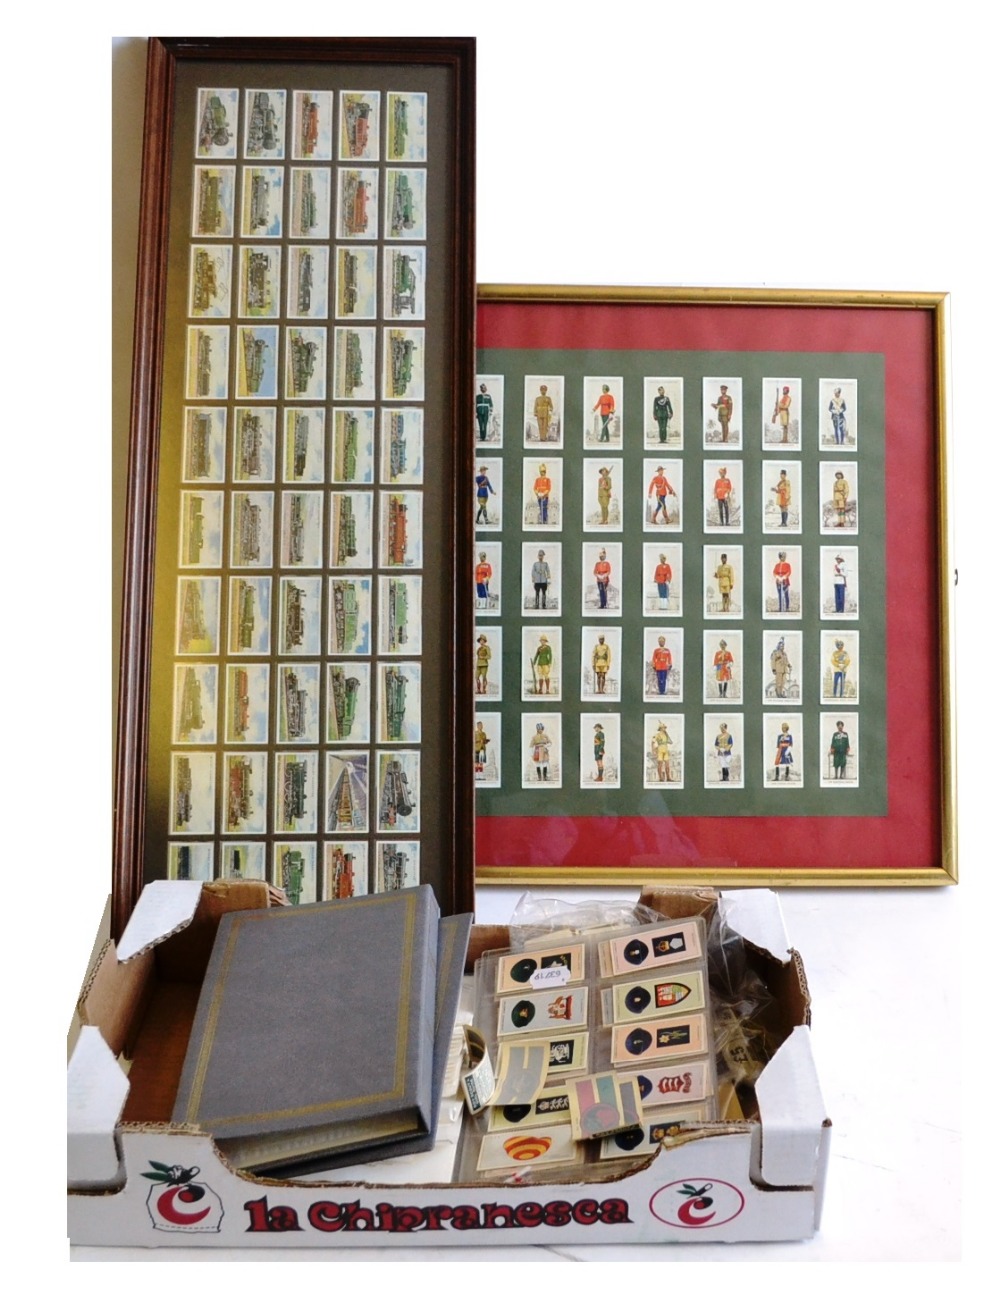 Cigarette Cards Wills Railway Engines and Players Military Uniforms (both mounted and framed) and